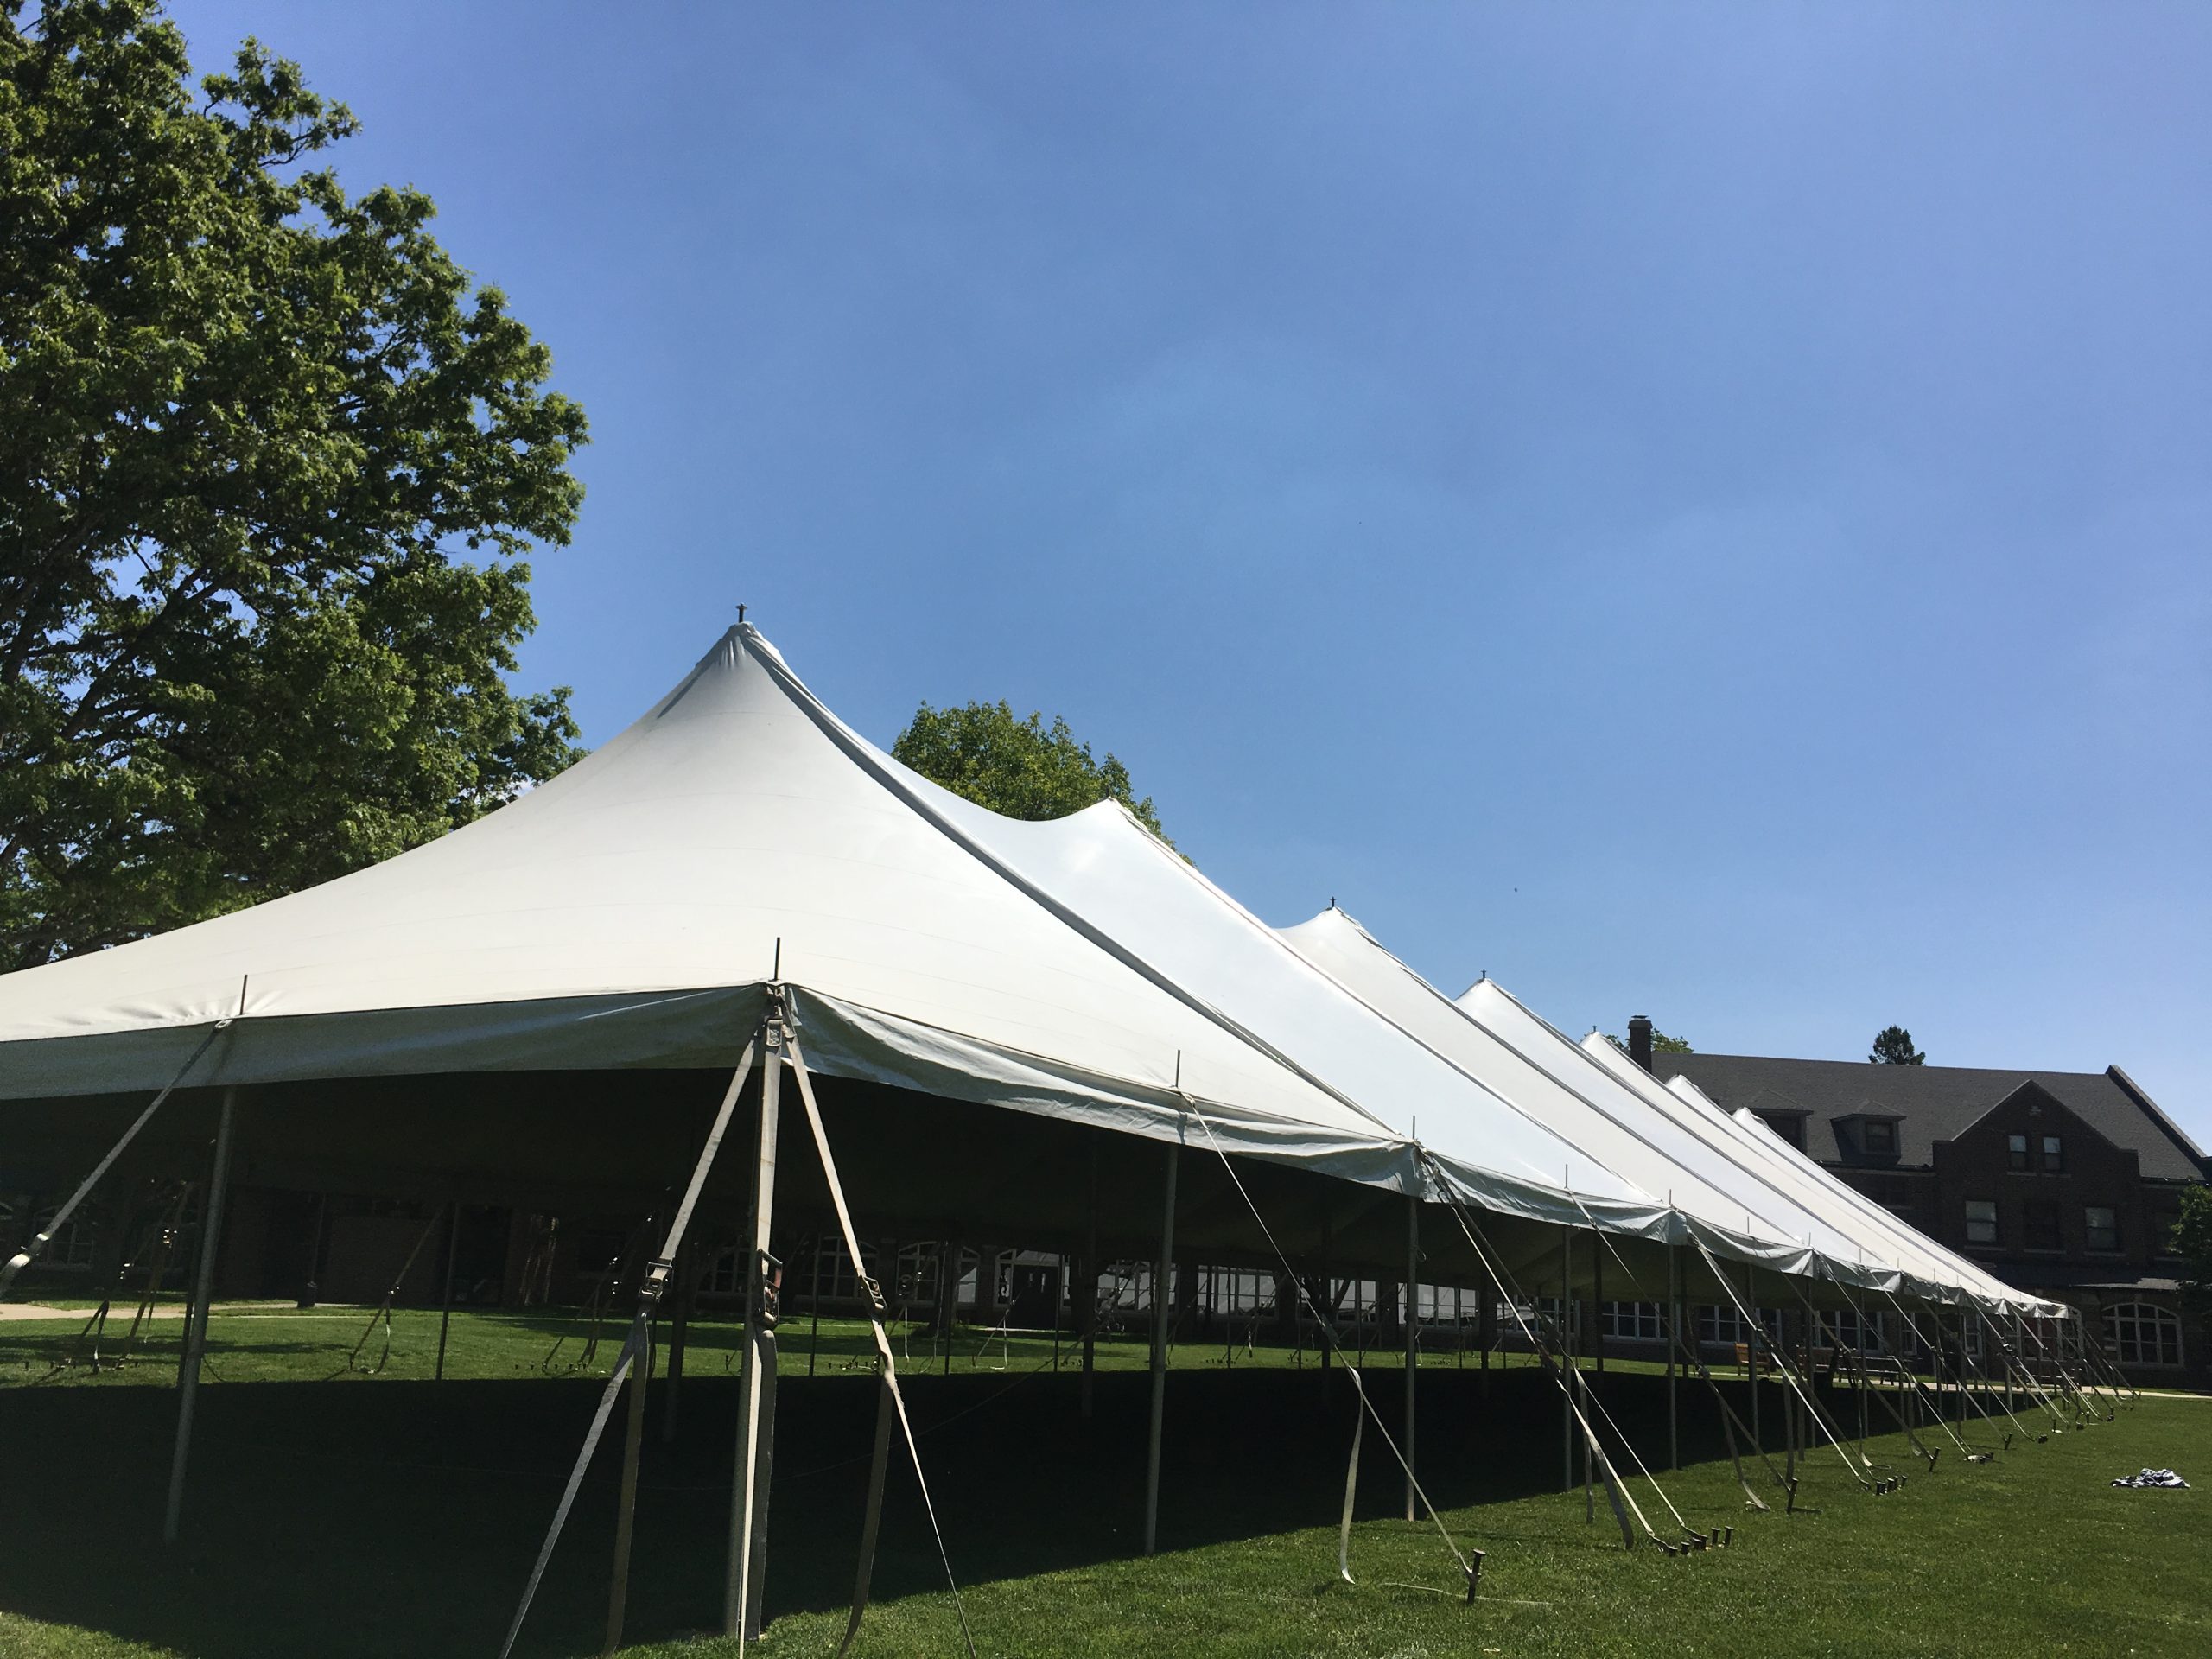 Outside of 40' x 160' rope and pole tent for a commencement ceremony at Grinnell College